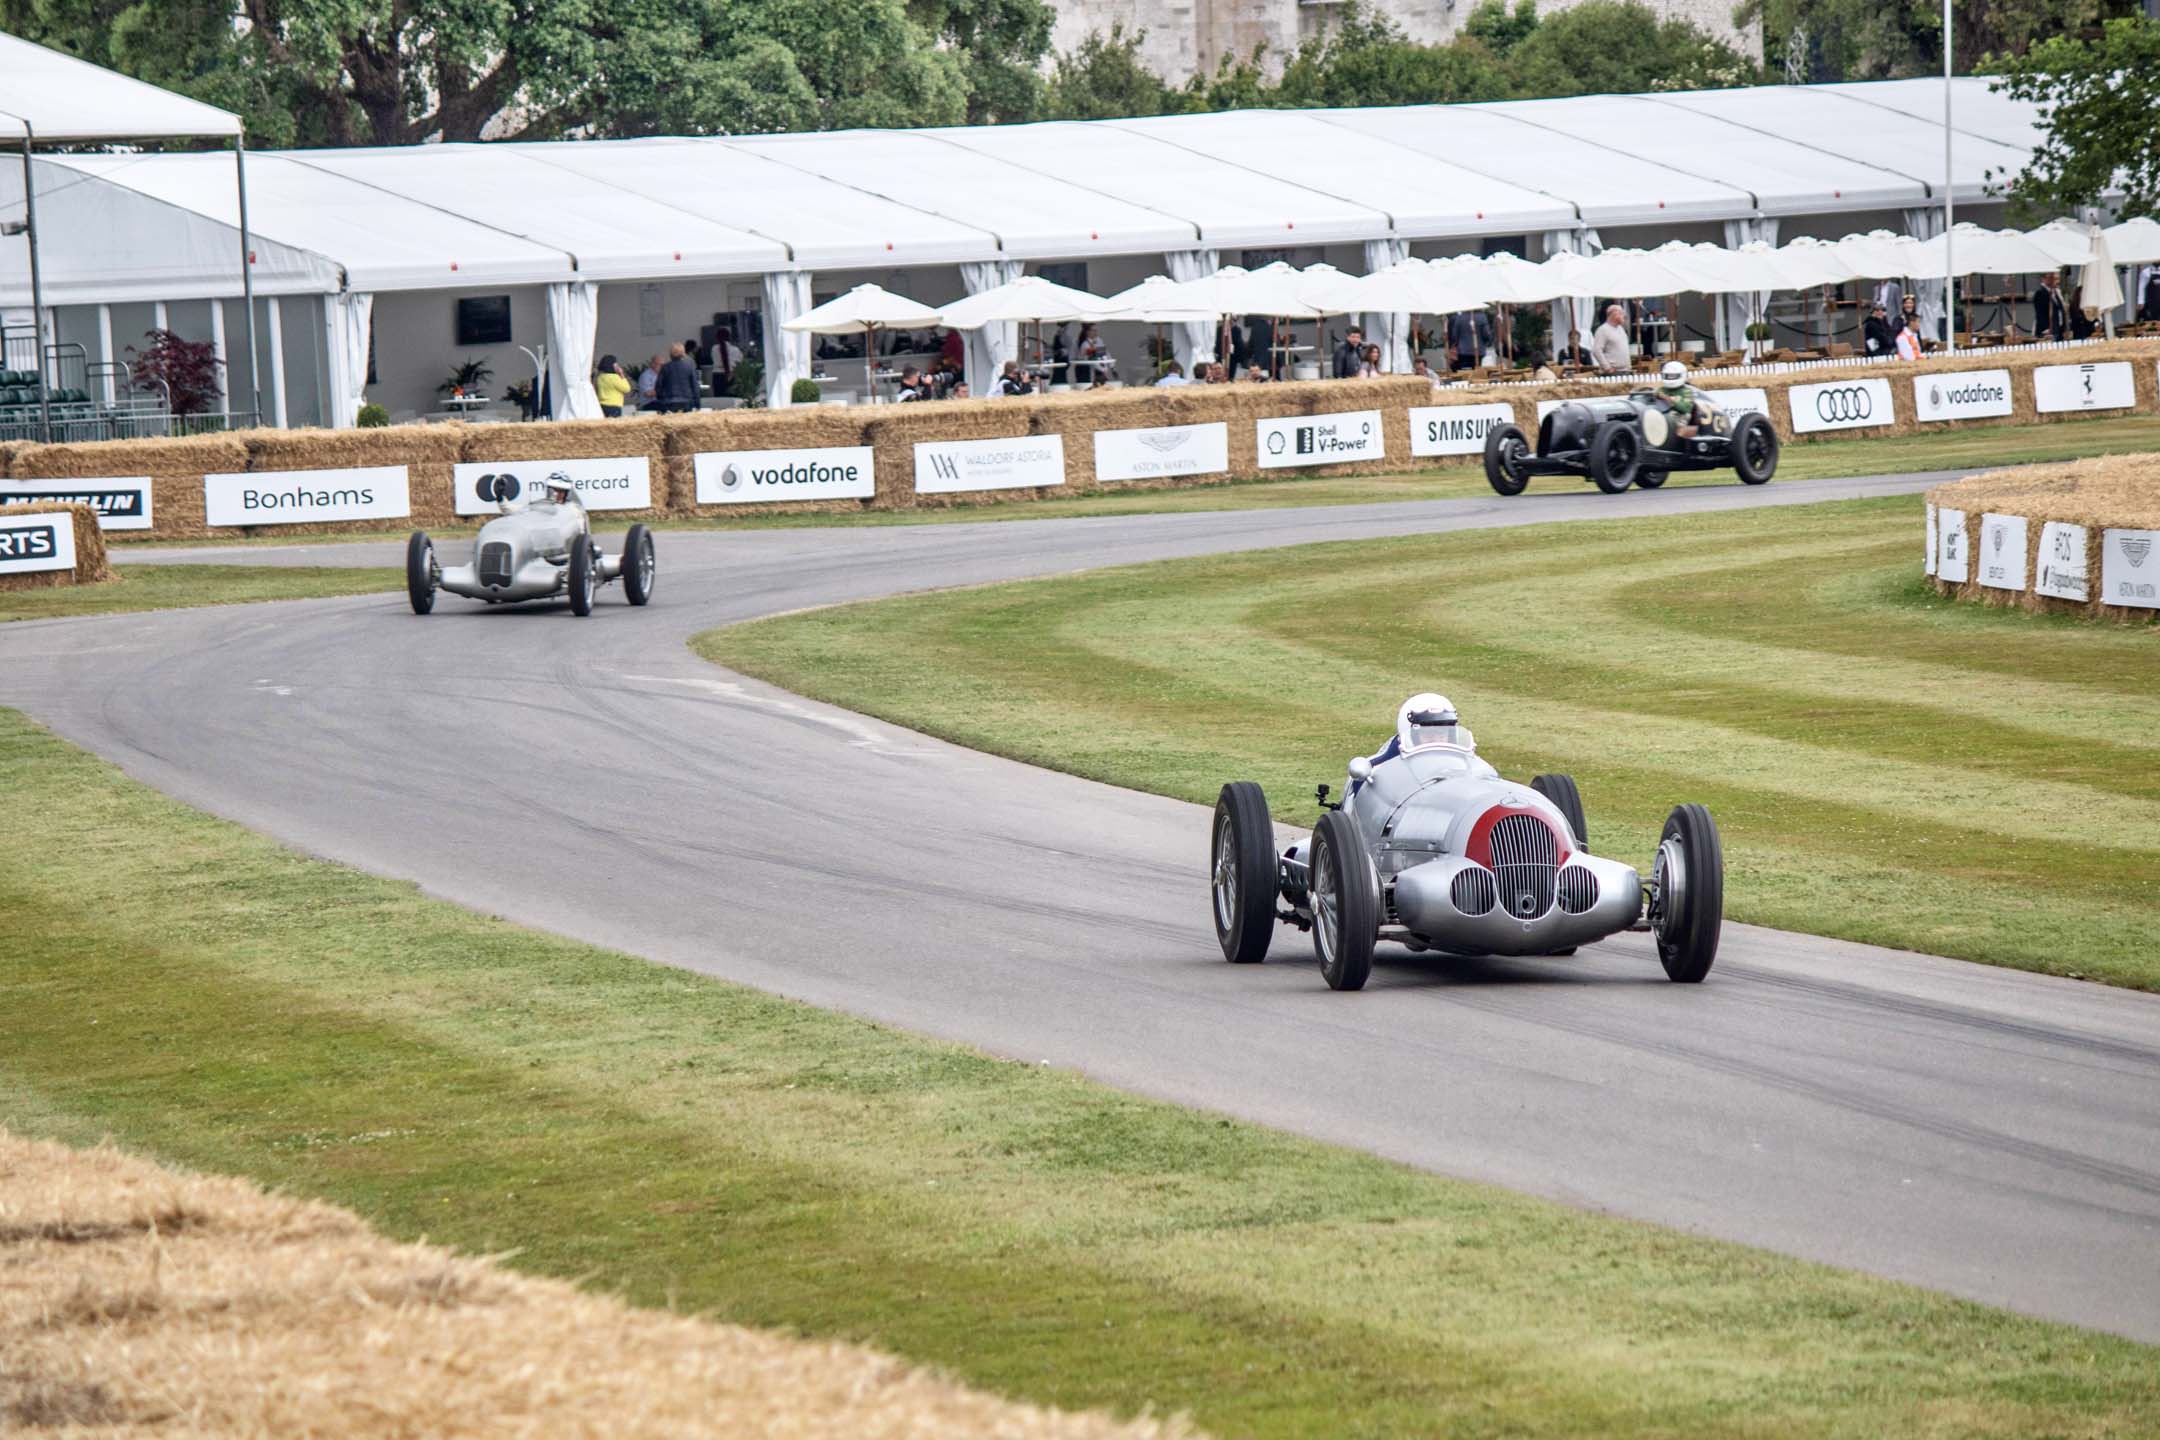 The Silver Arrows lead the pack down to the staging area. Astoundingly loud, complete with whining superchargers, this pair of vintage racers sounded like the grumpy ancestors of the Dodge Hellcat. The Mercedes Silver Arrows racing team dominated everyone, much like today’s F1 team.